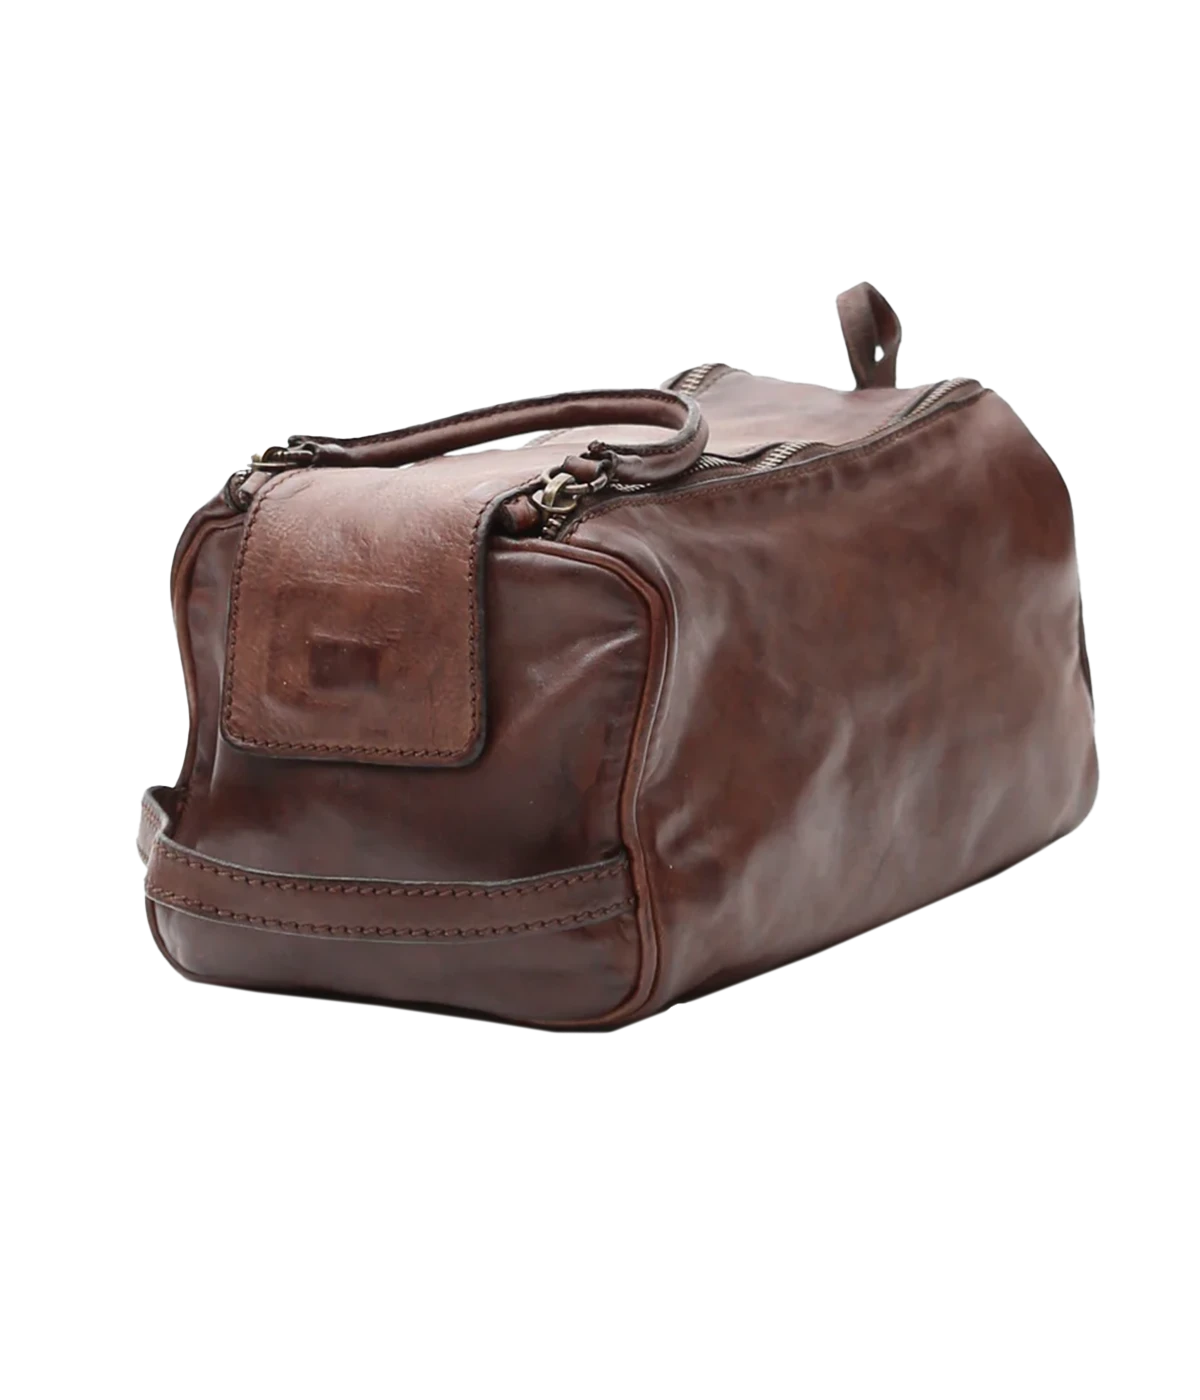 Leather Toiletries Bag in Brown